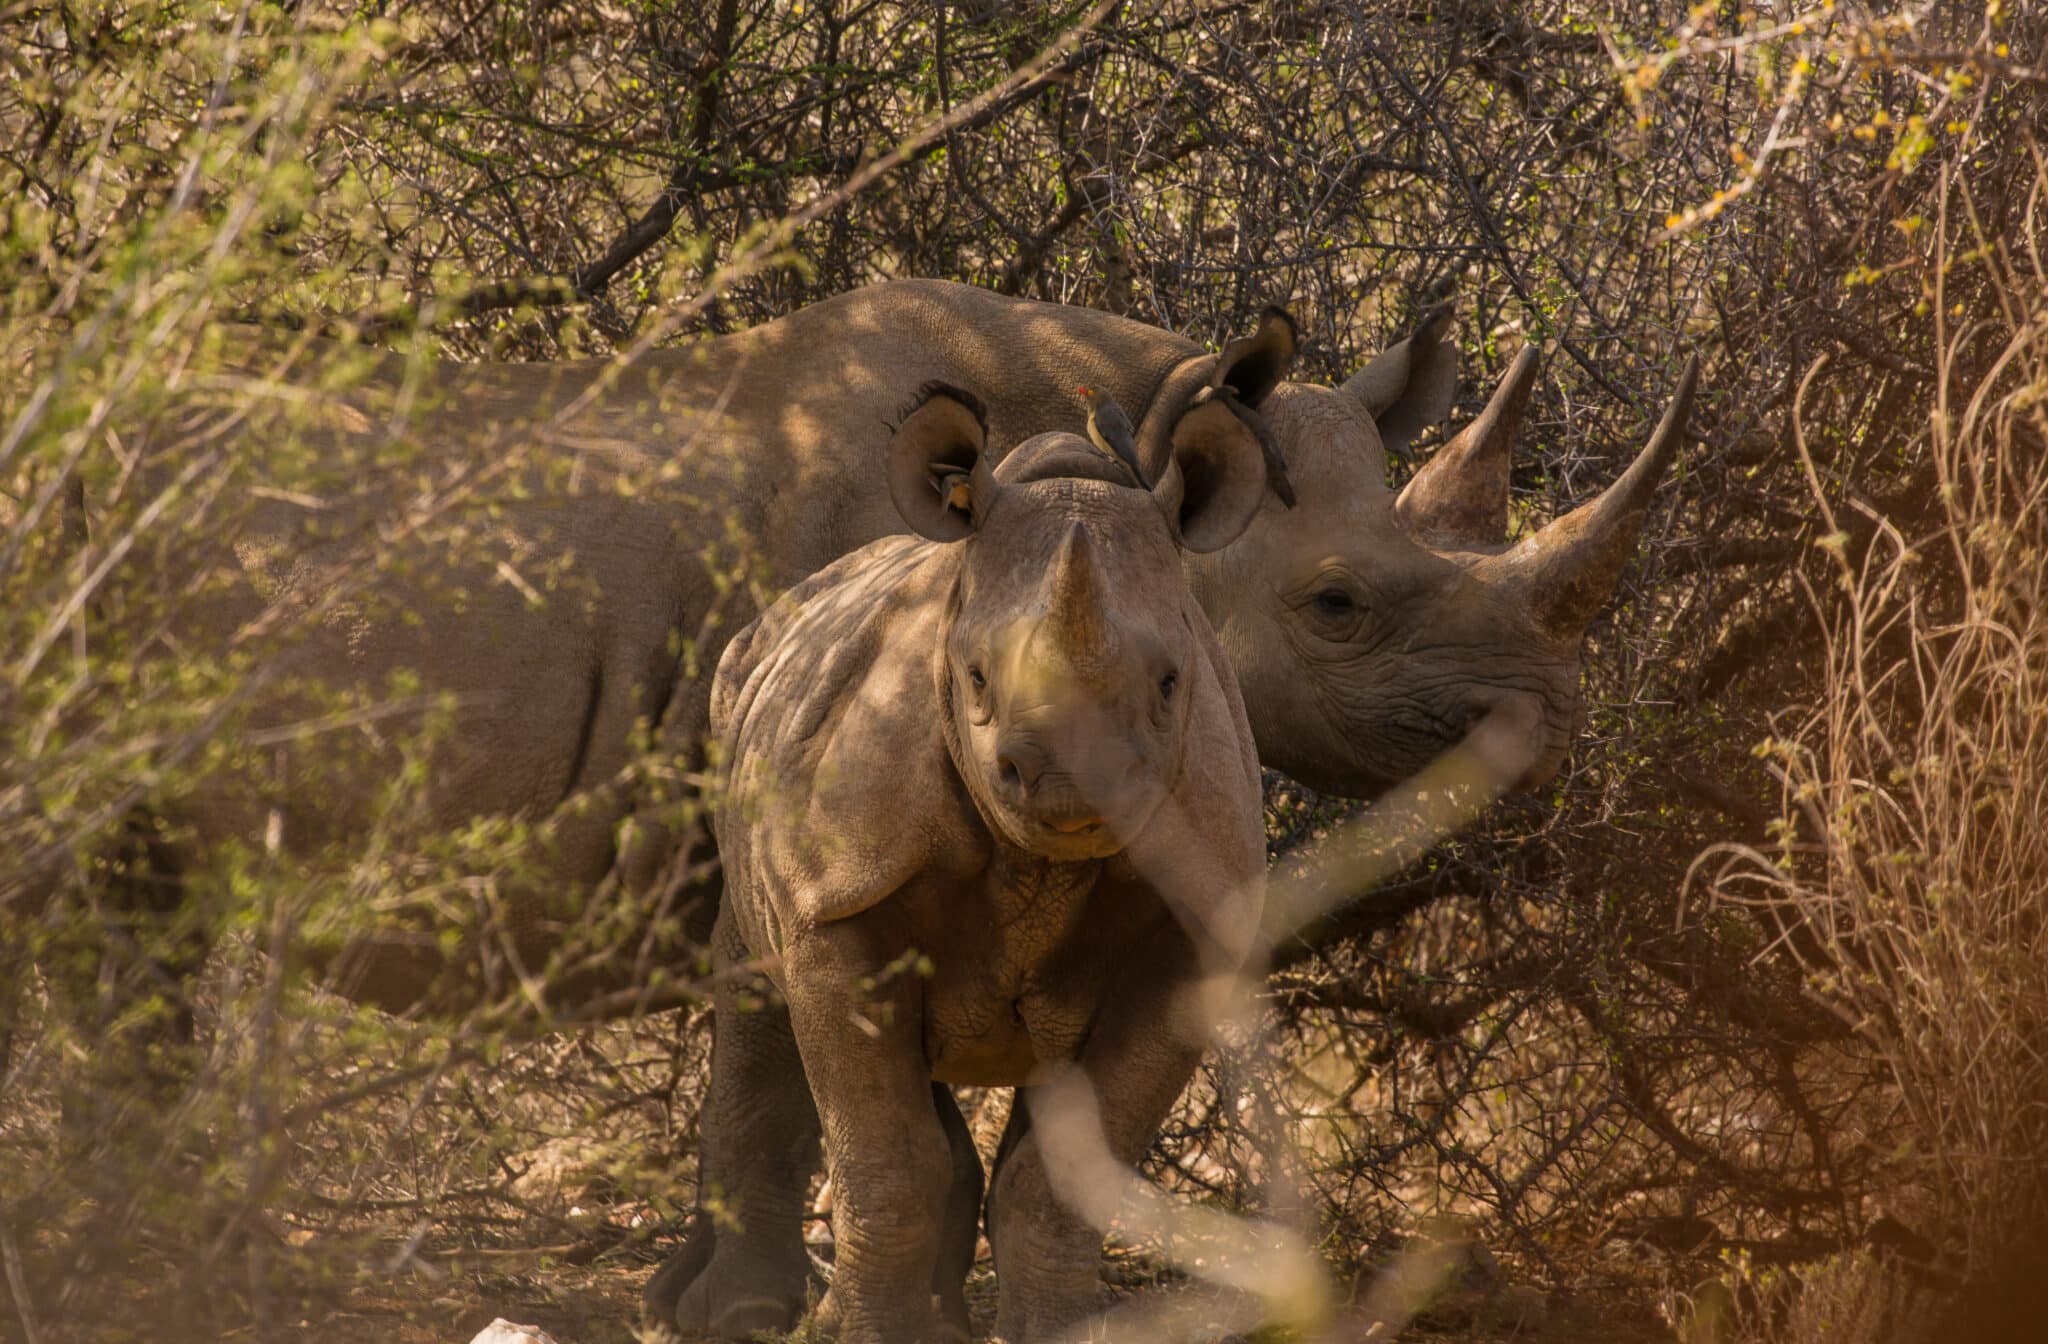 A rhino and its baby in the Sera Conservancy in Kenya